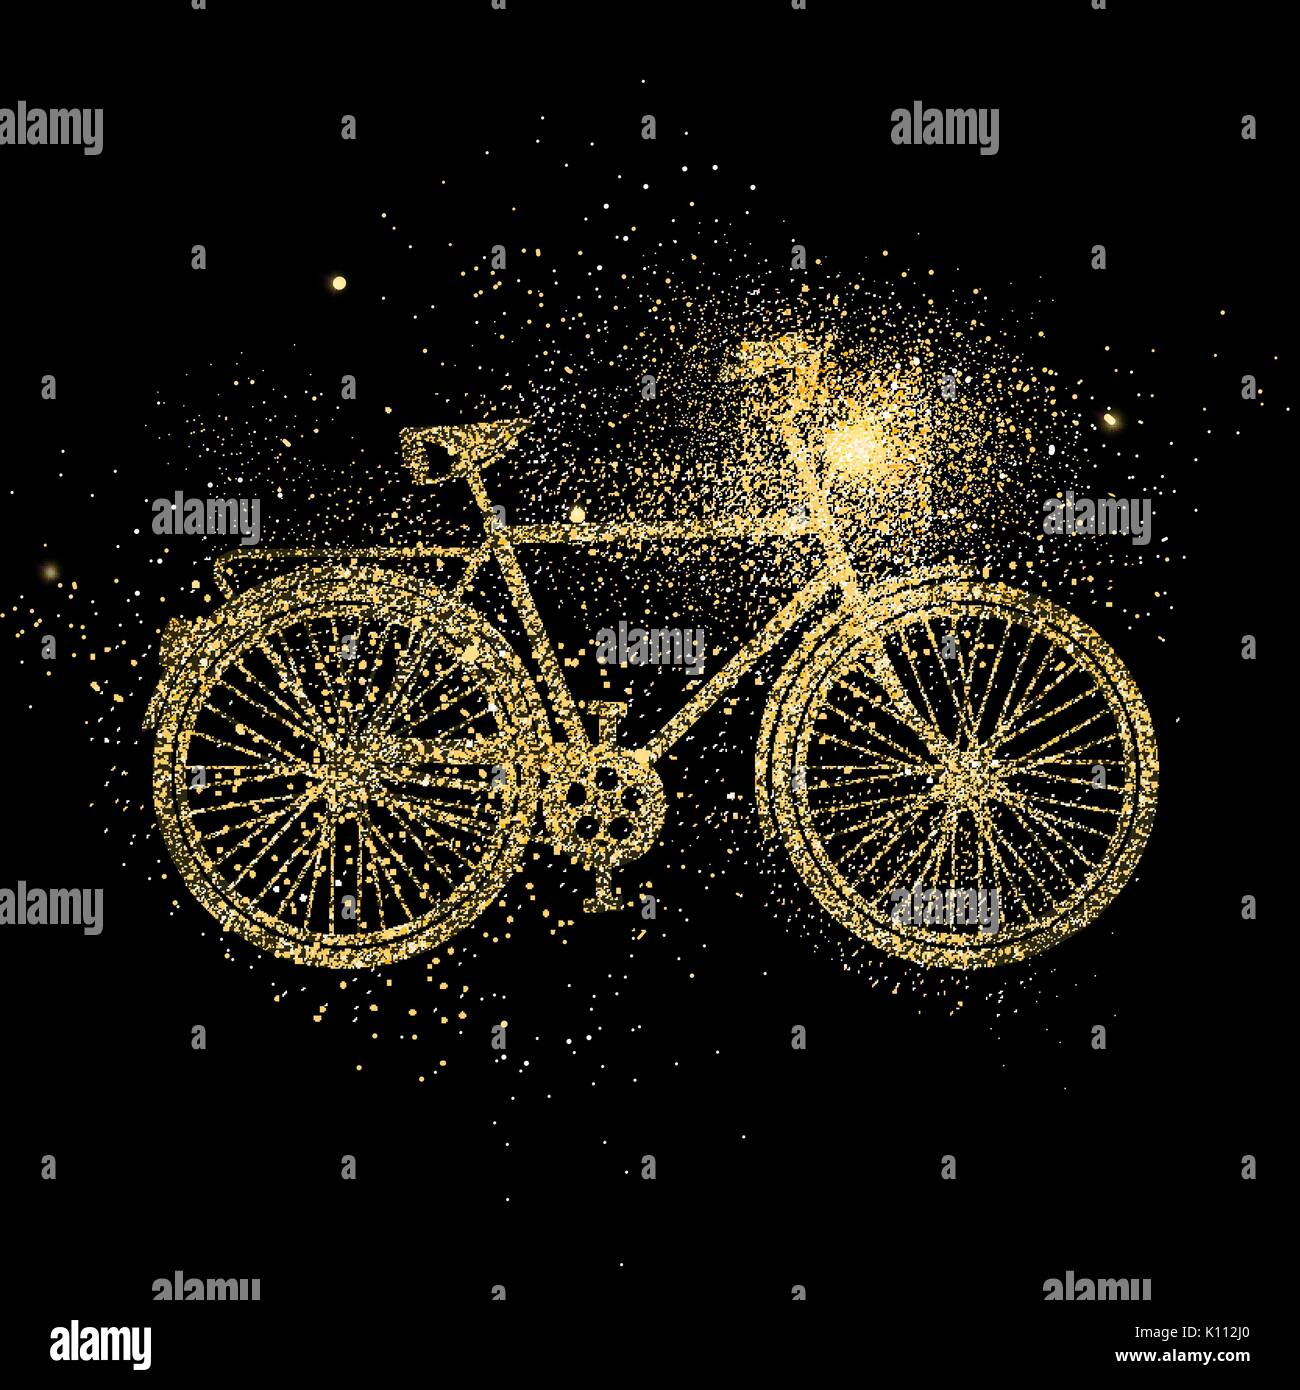 Bicycle symbol concept illustration, gold bike icon made of realistic golden glitter dust on black background. EPS10 vector. Stock Vector